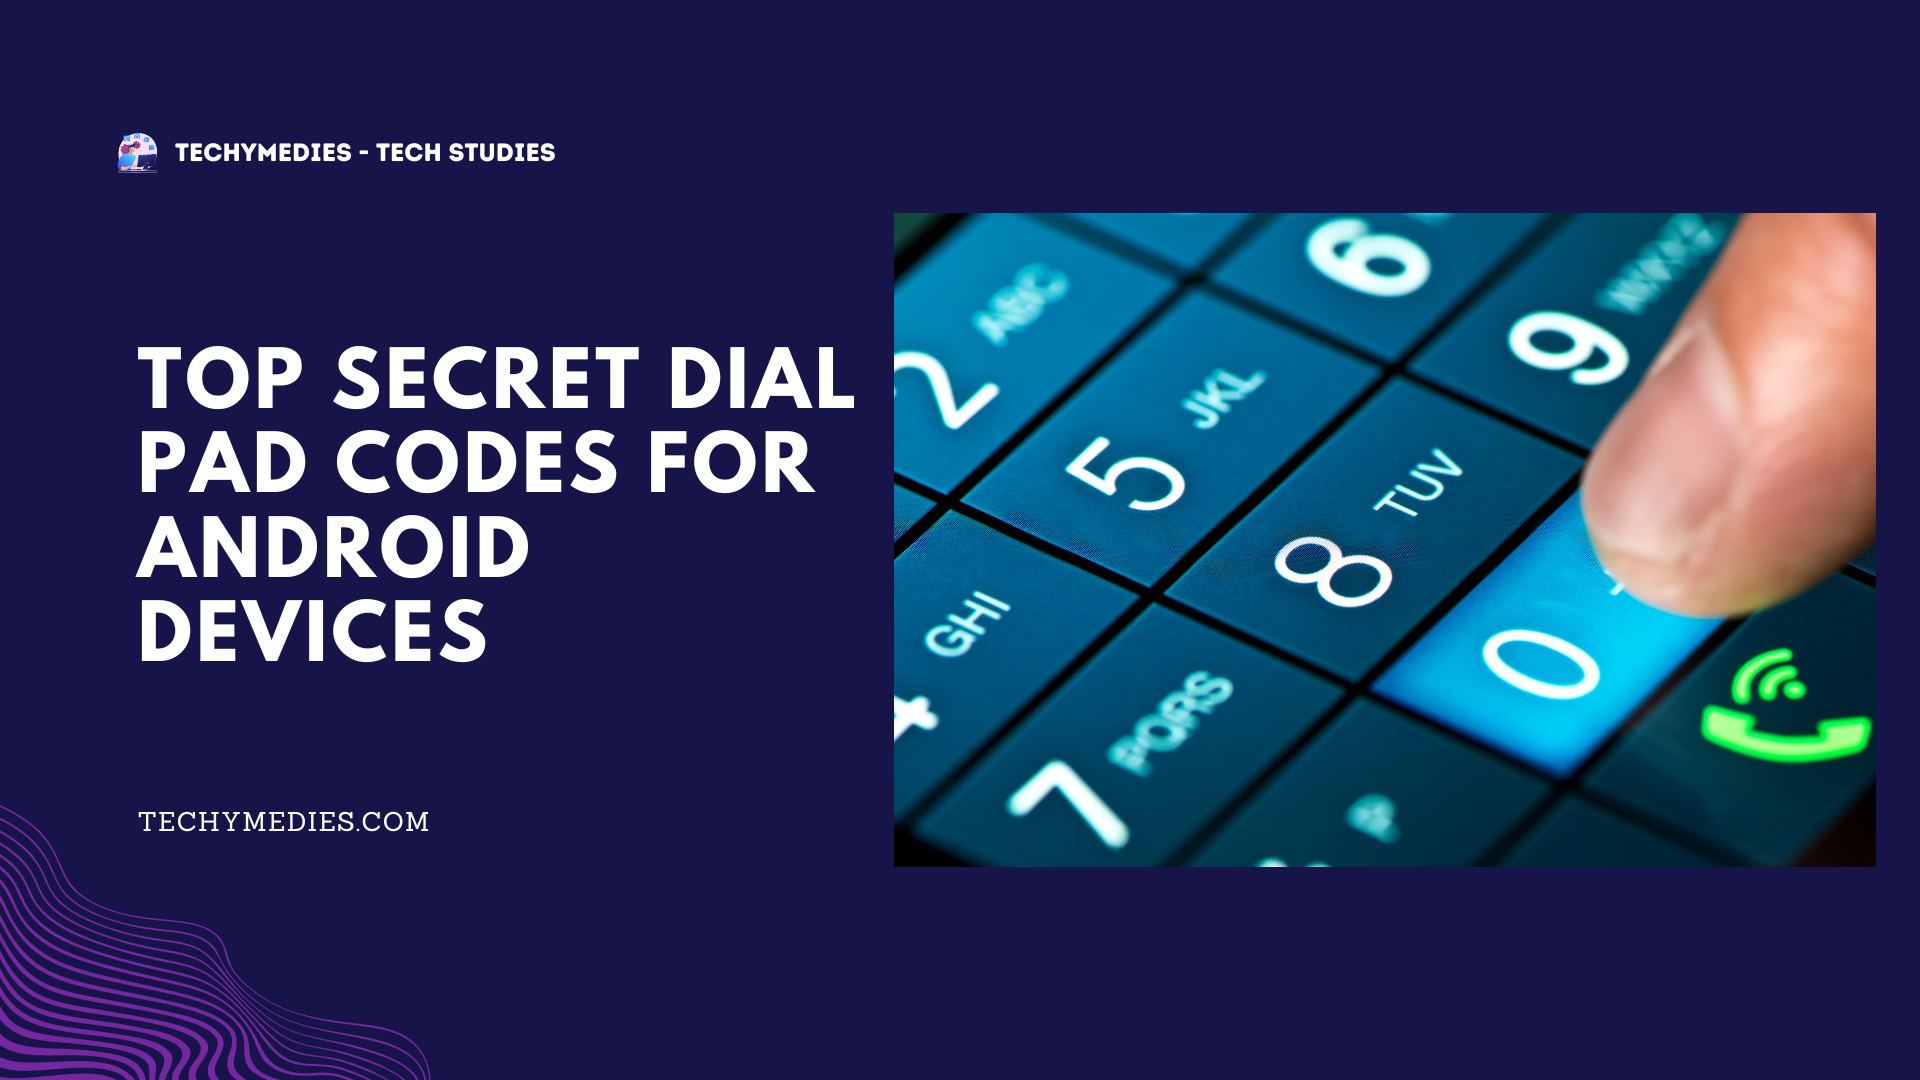 Top Secret Dial Pad Codes For Android Devices